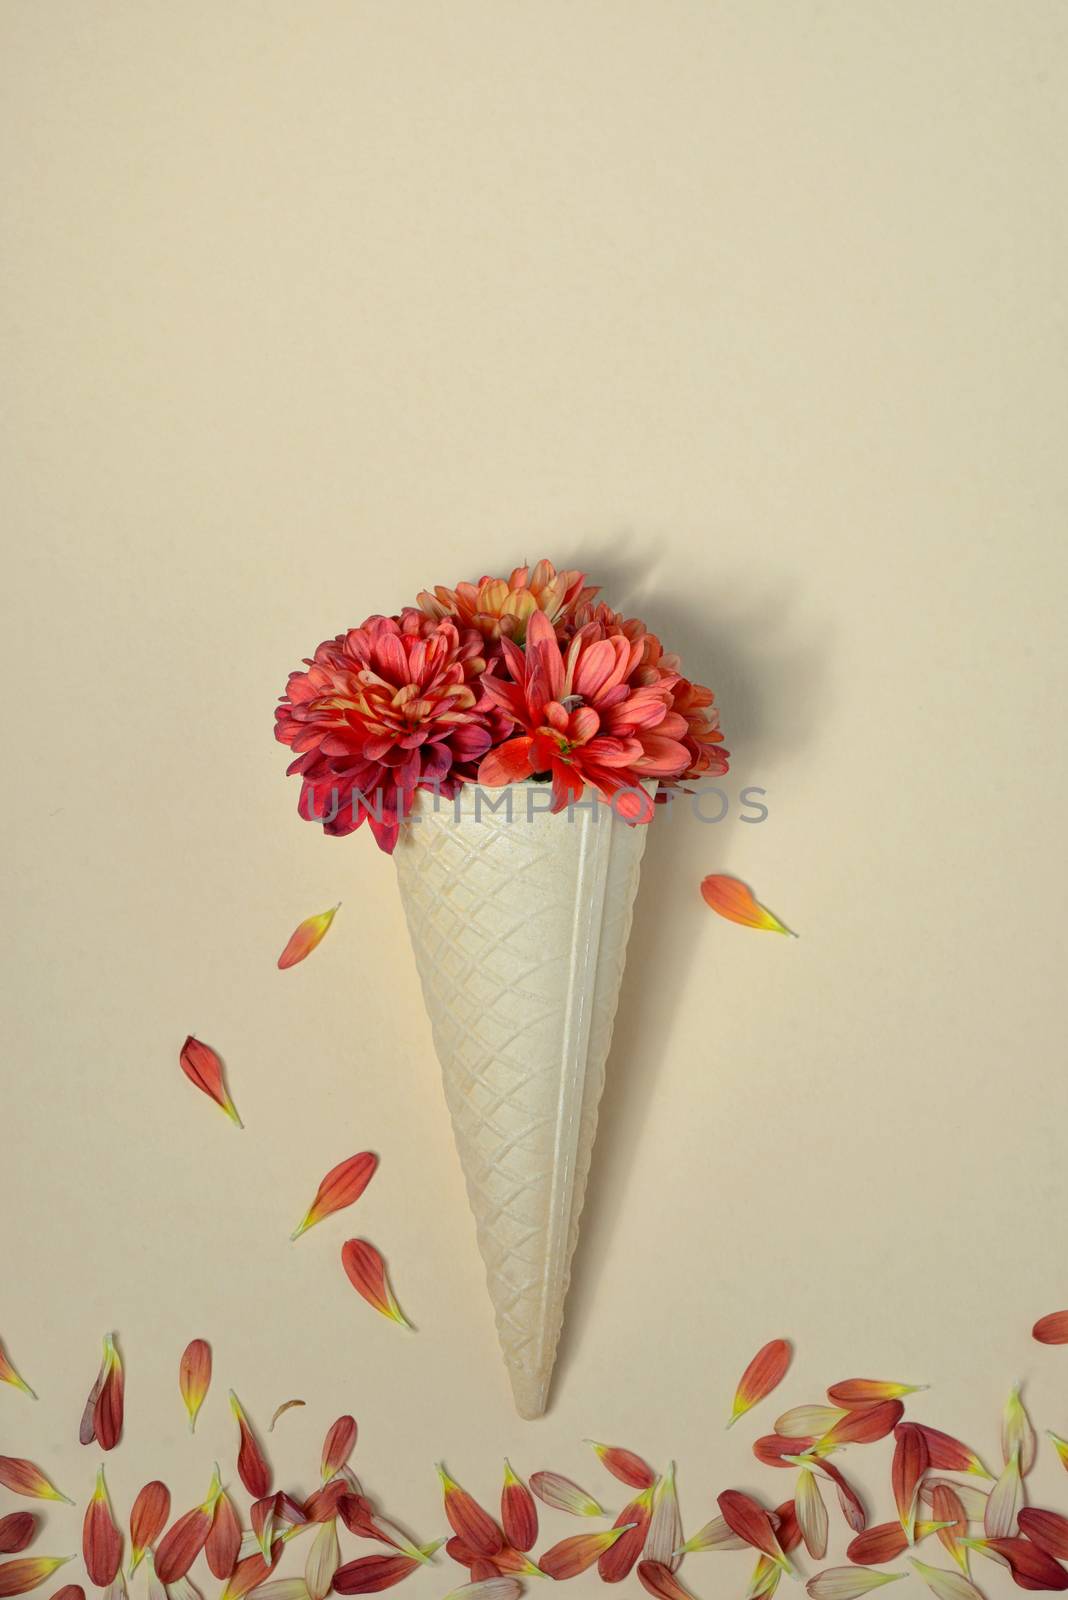 Autumn flowers in ice cream cone by mady70